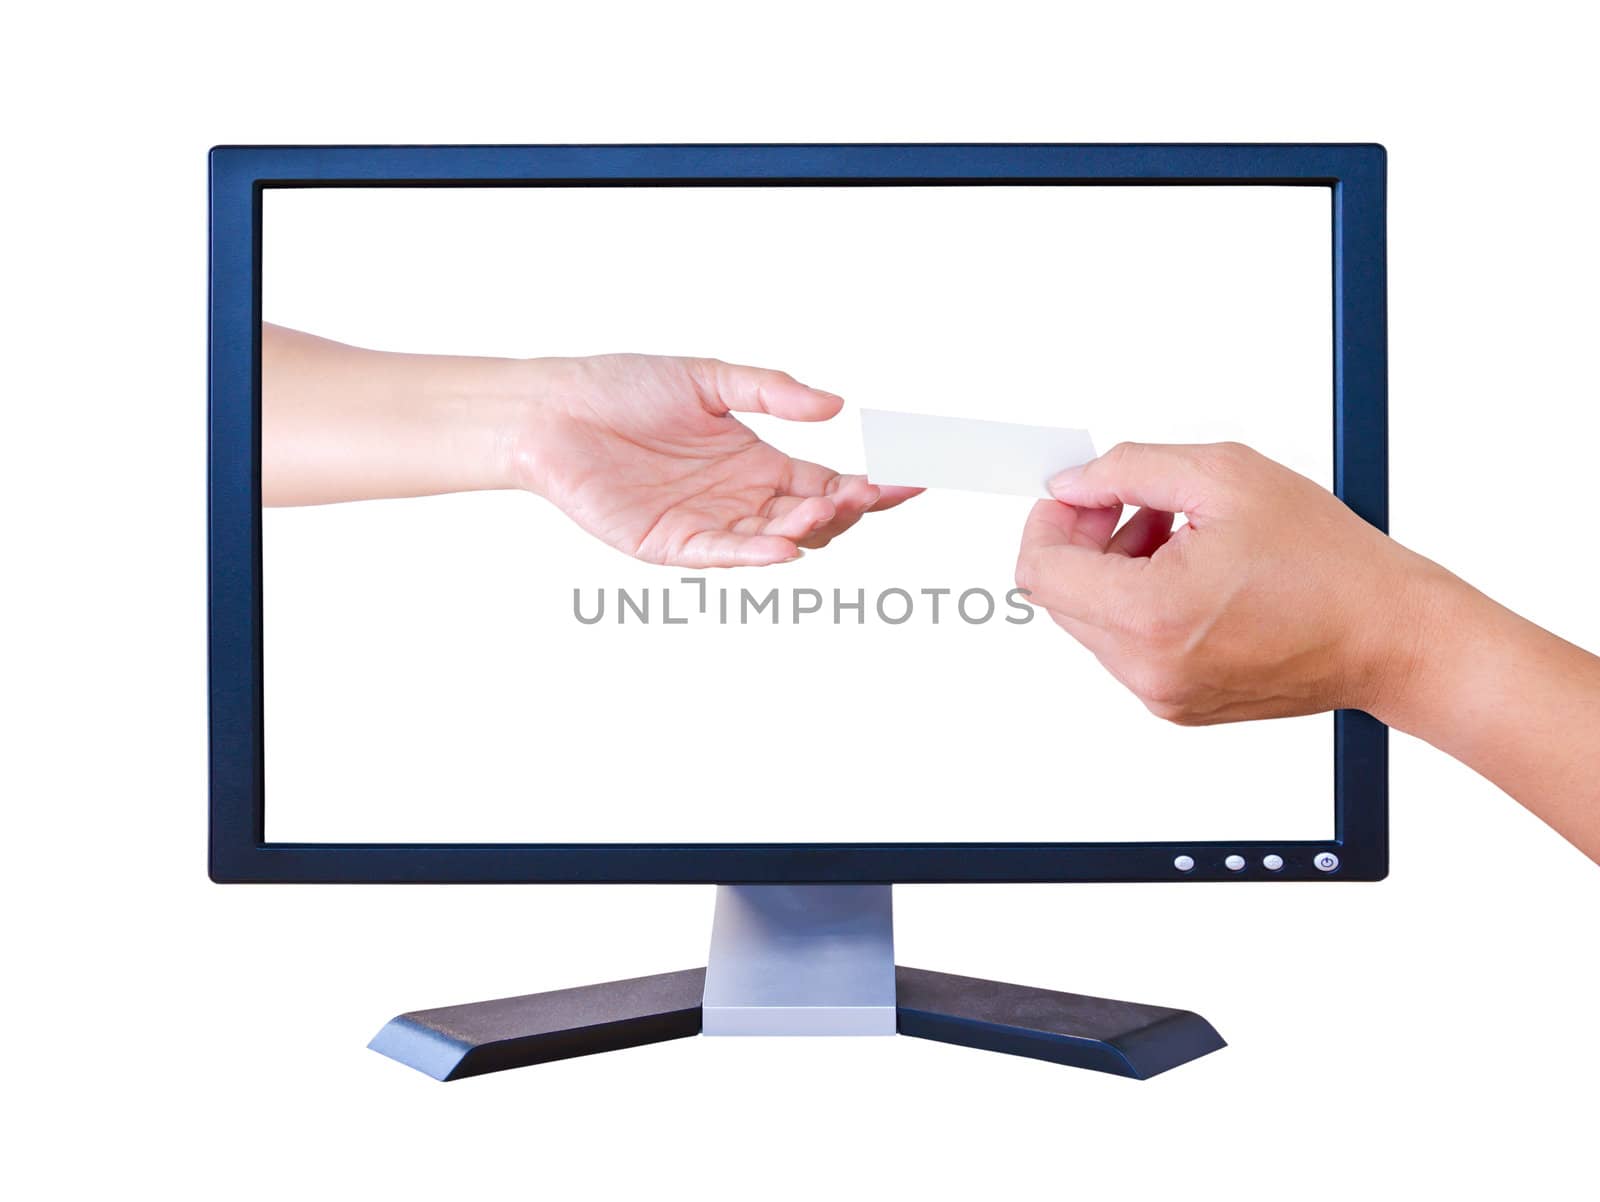 hand outside monitor give name card to hand inside monitor